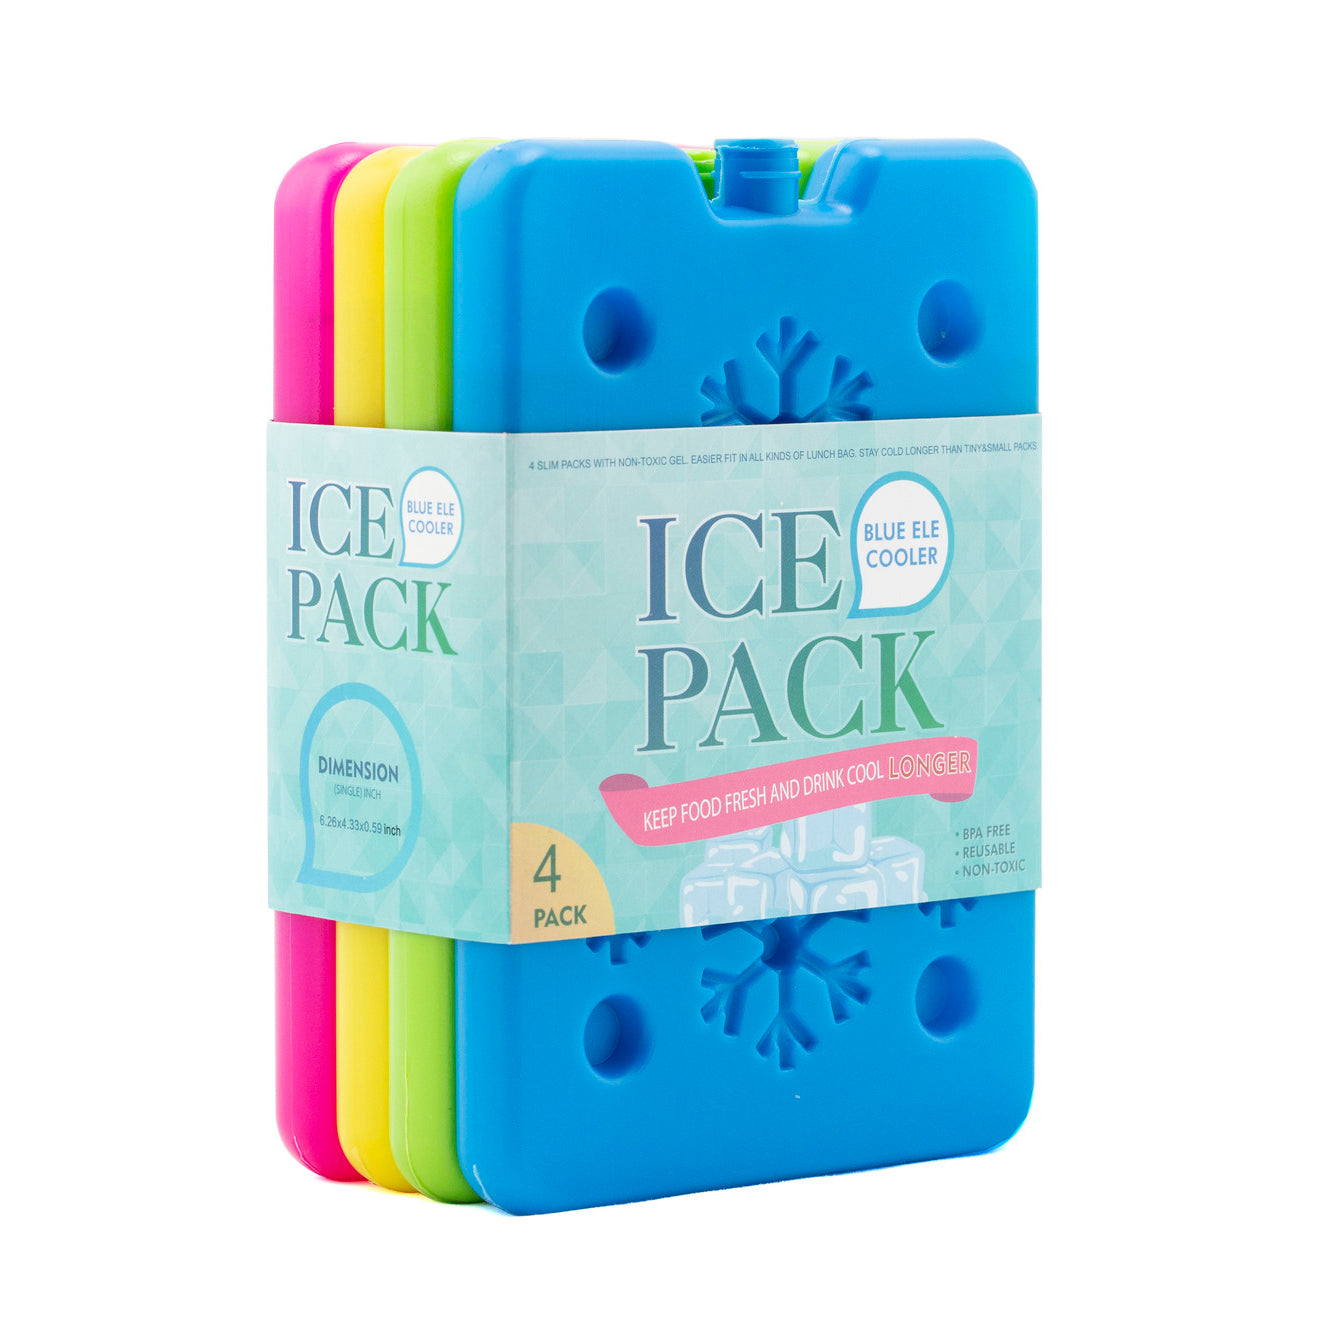 BLUE ELE Ice Pack for Kids Lunch Box or Cooler - Each Order